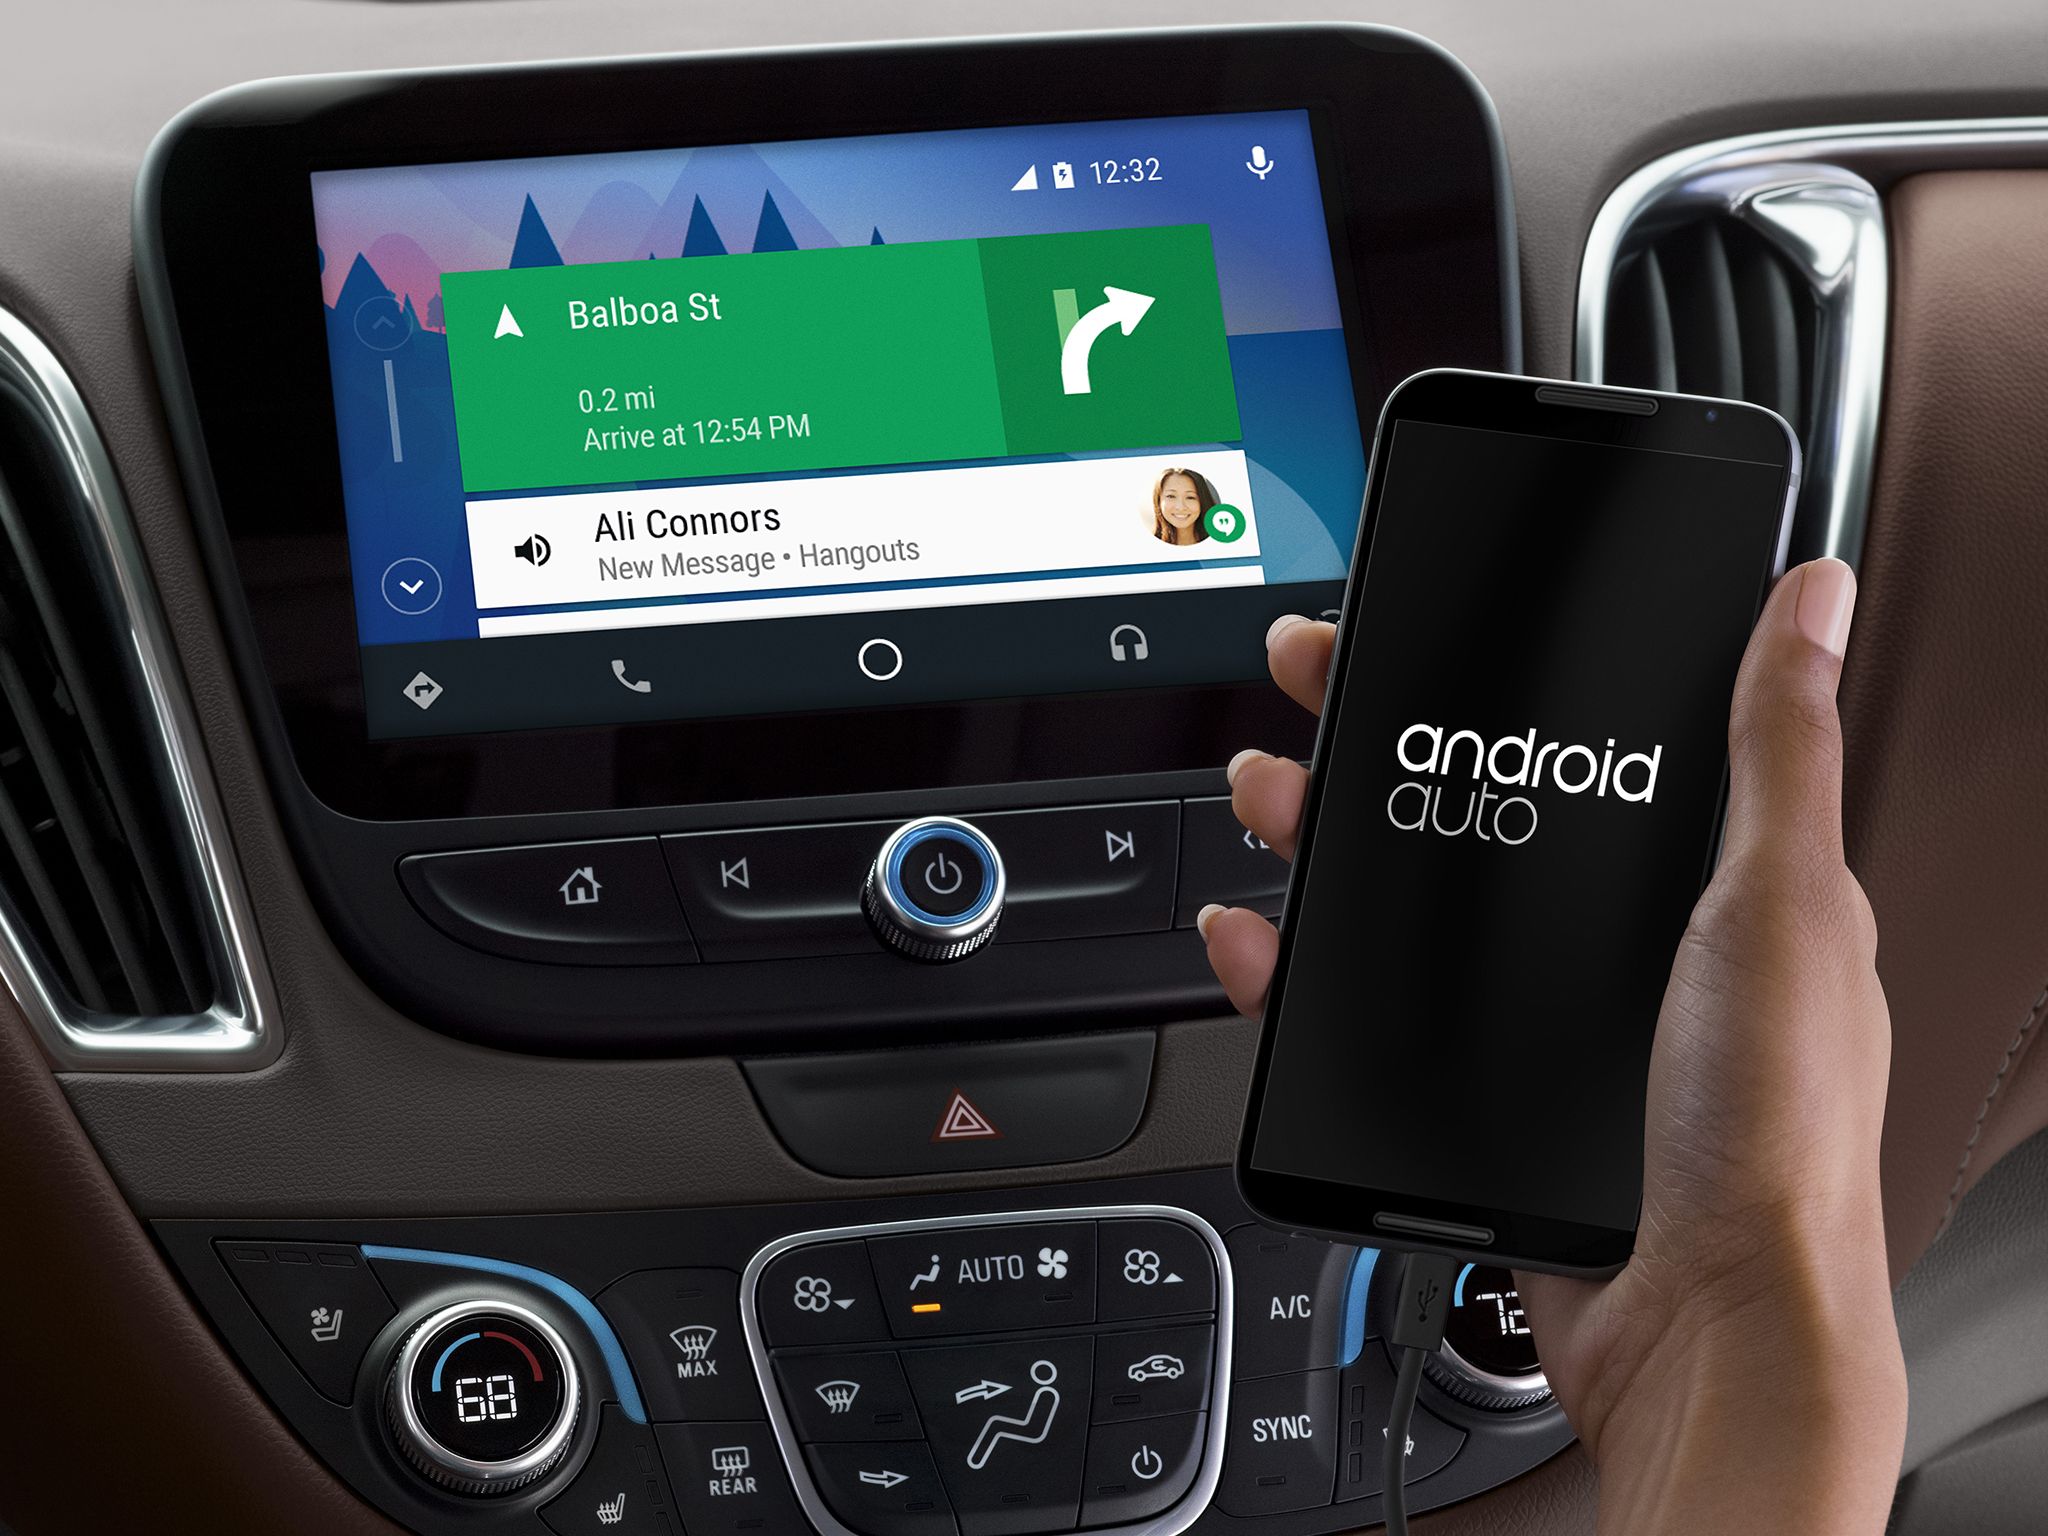 Chevrolet dealers offering free Android Auto update for select vehicles